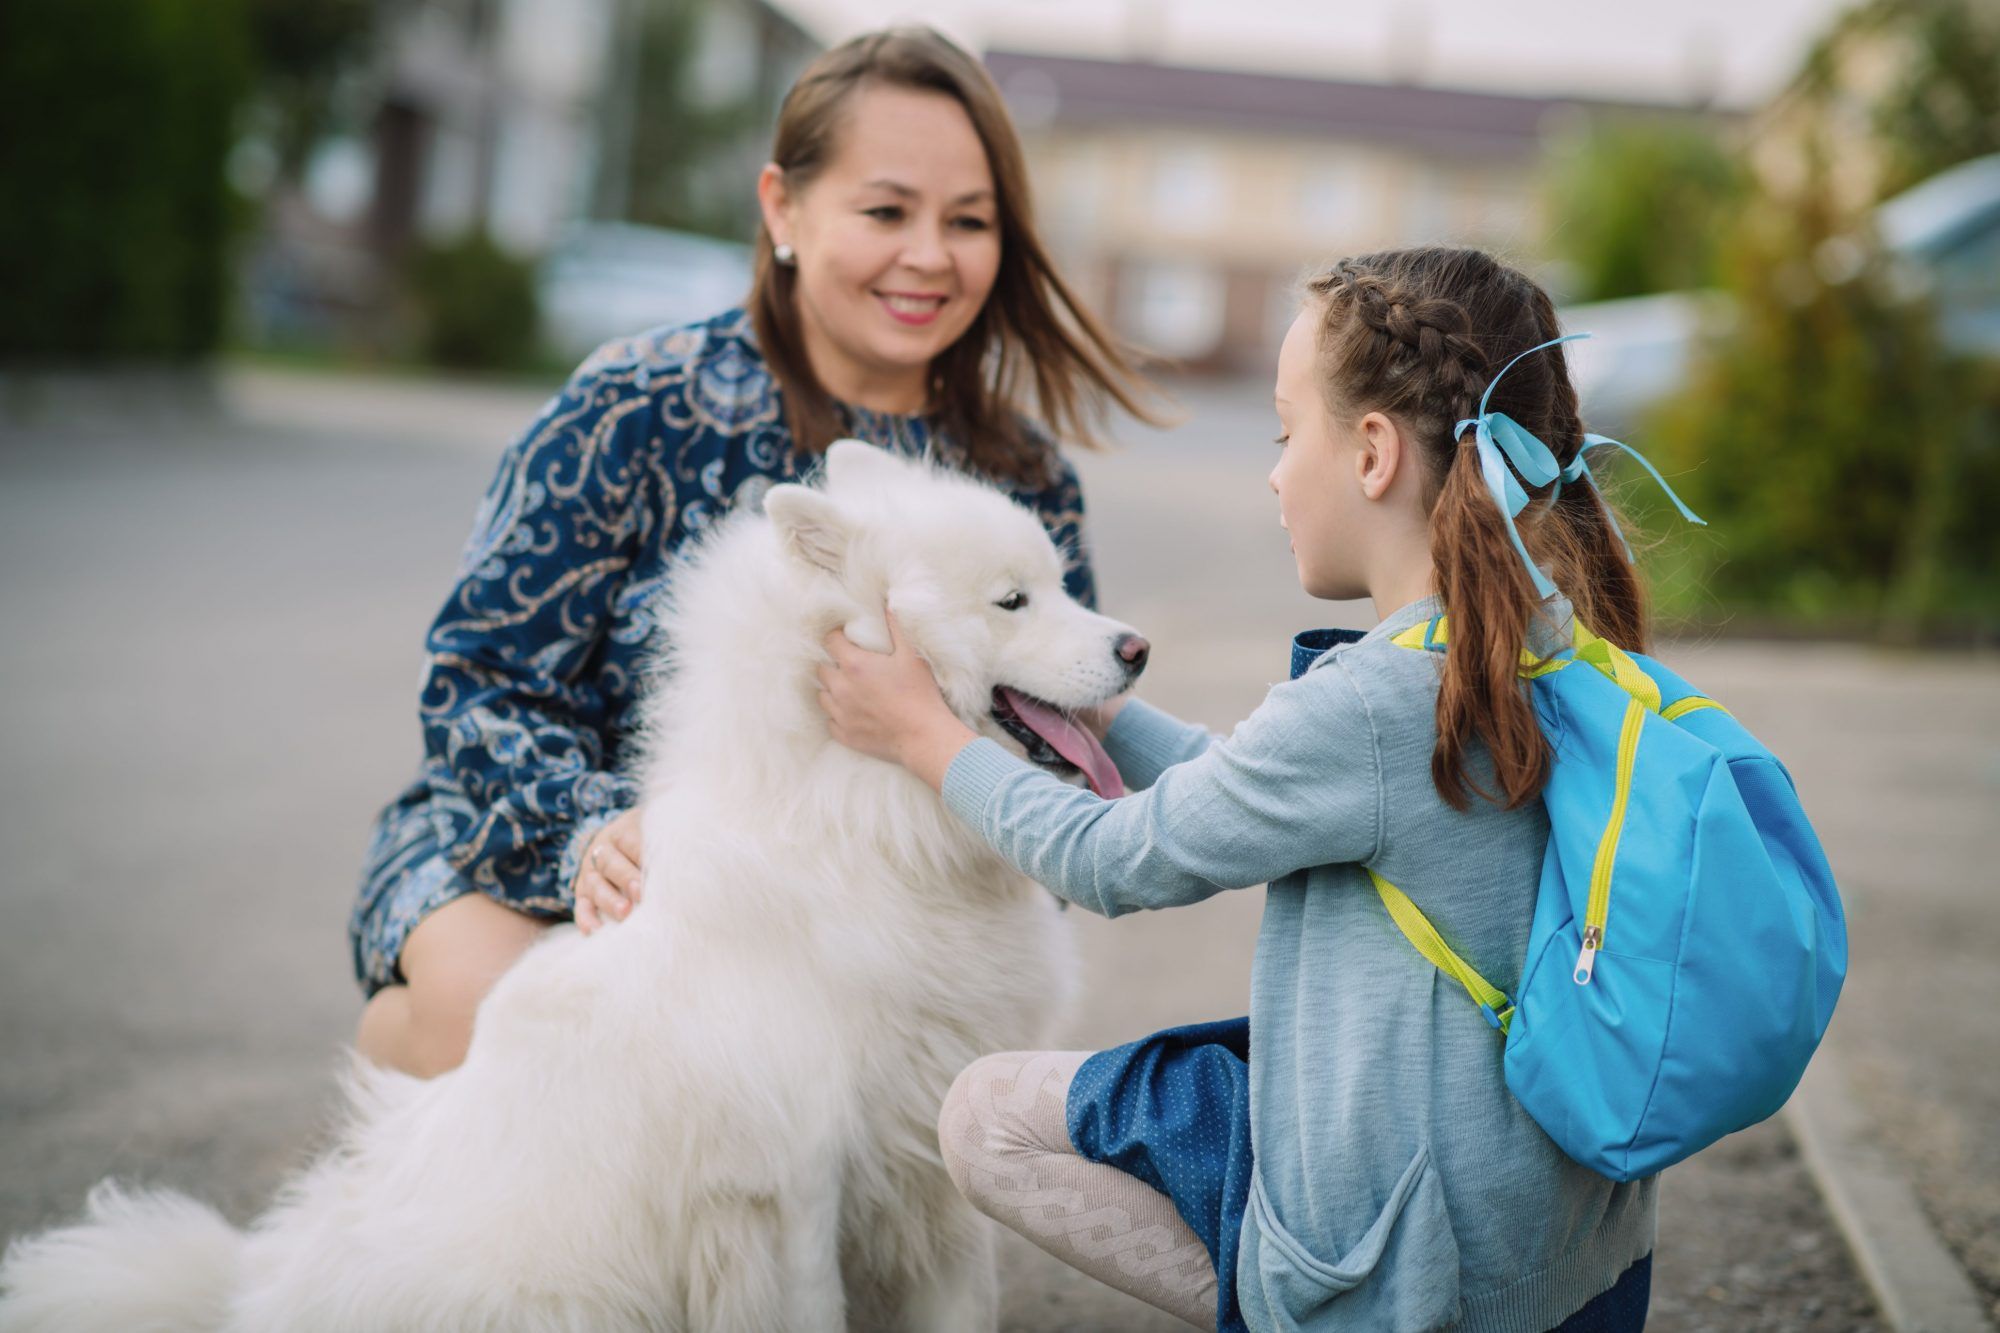 How To Improve Pet Safety During the Back-to-School Season